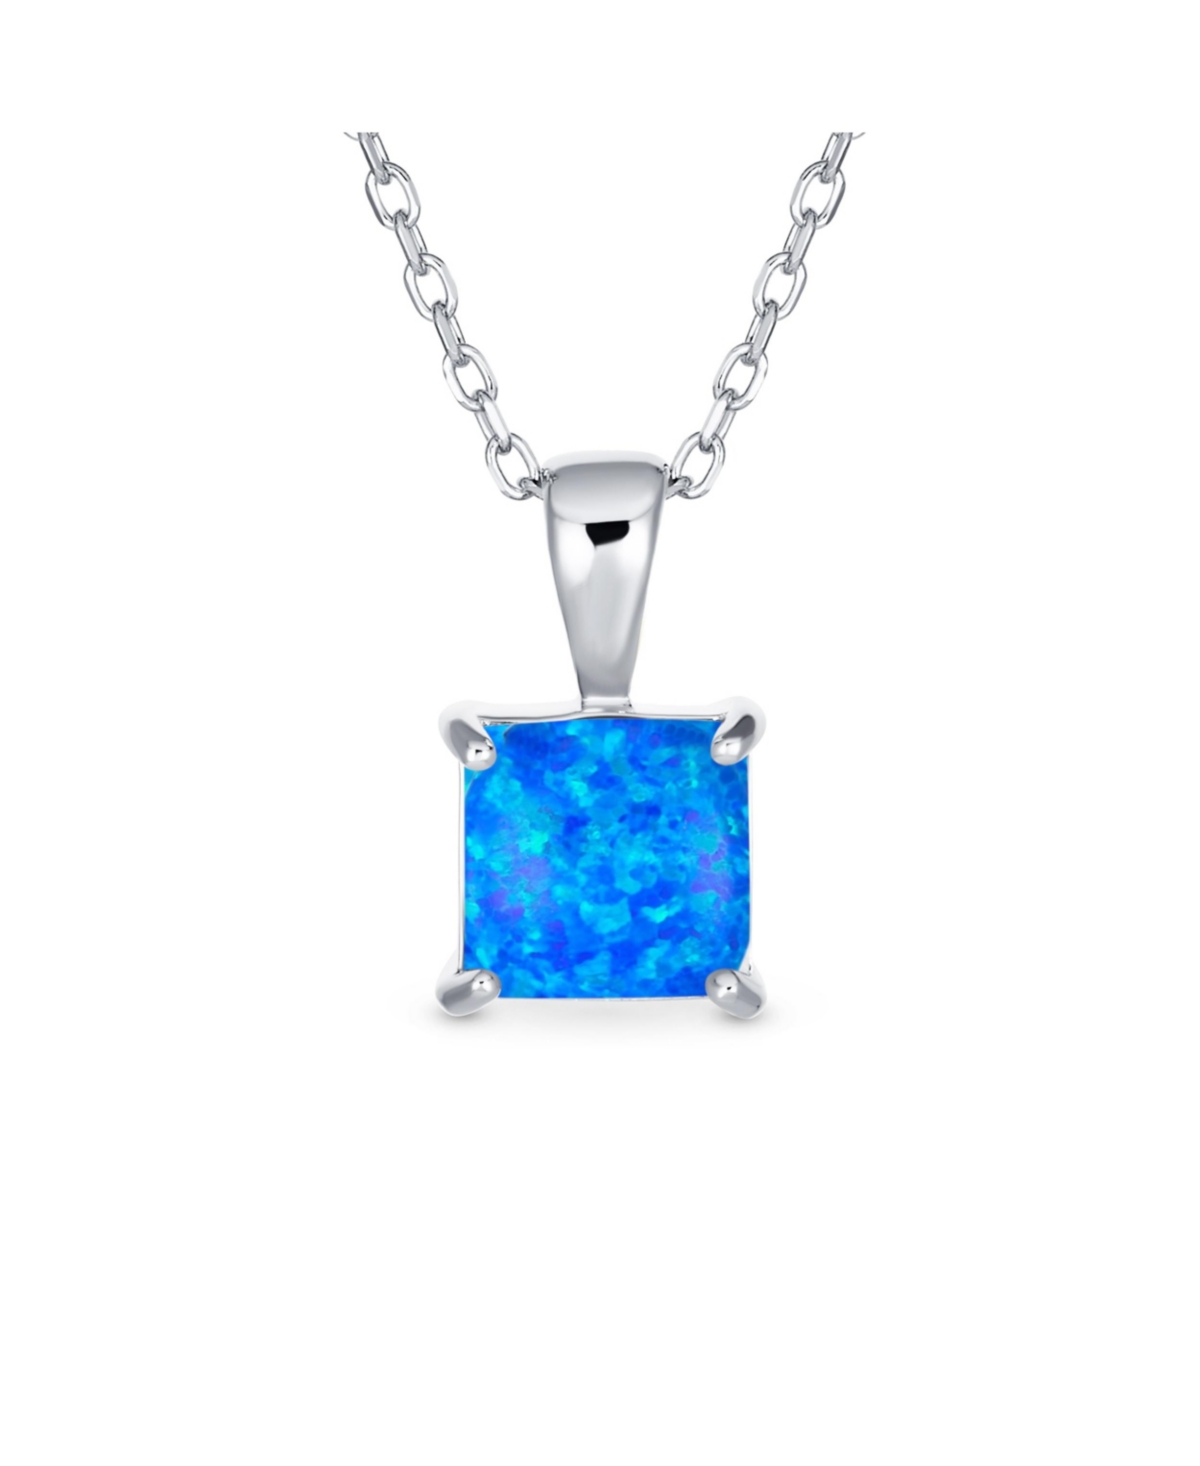 Dainty 4 Prong Set 1.25 Ct Solitaire Square Princess Cut Blue Created Opal Gemstone Pendant Necklace For Women Teens .925 Sterling Silve